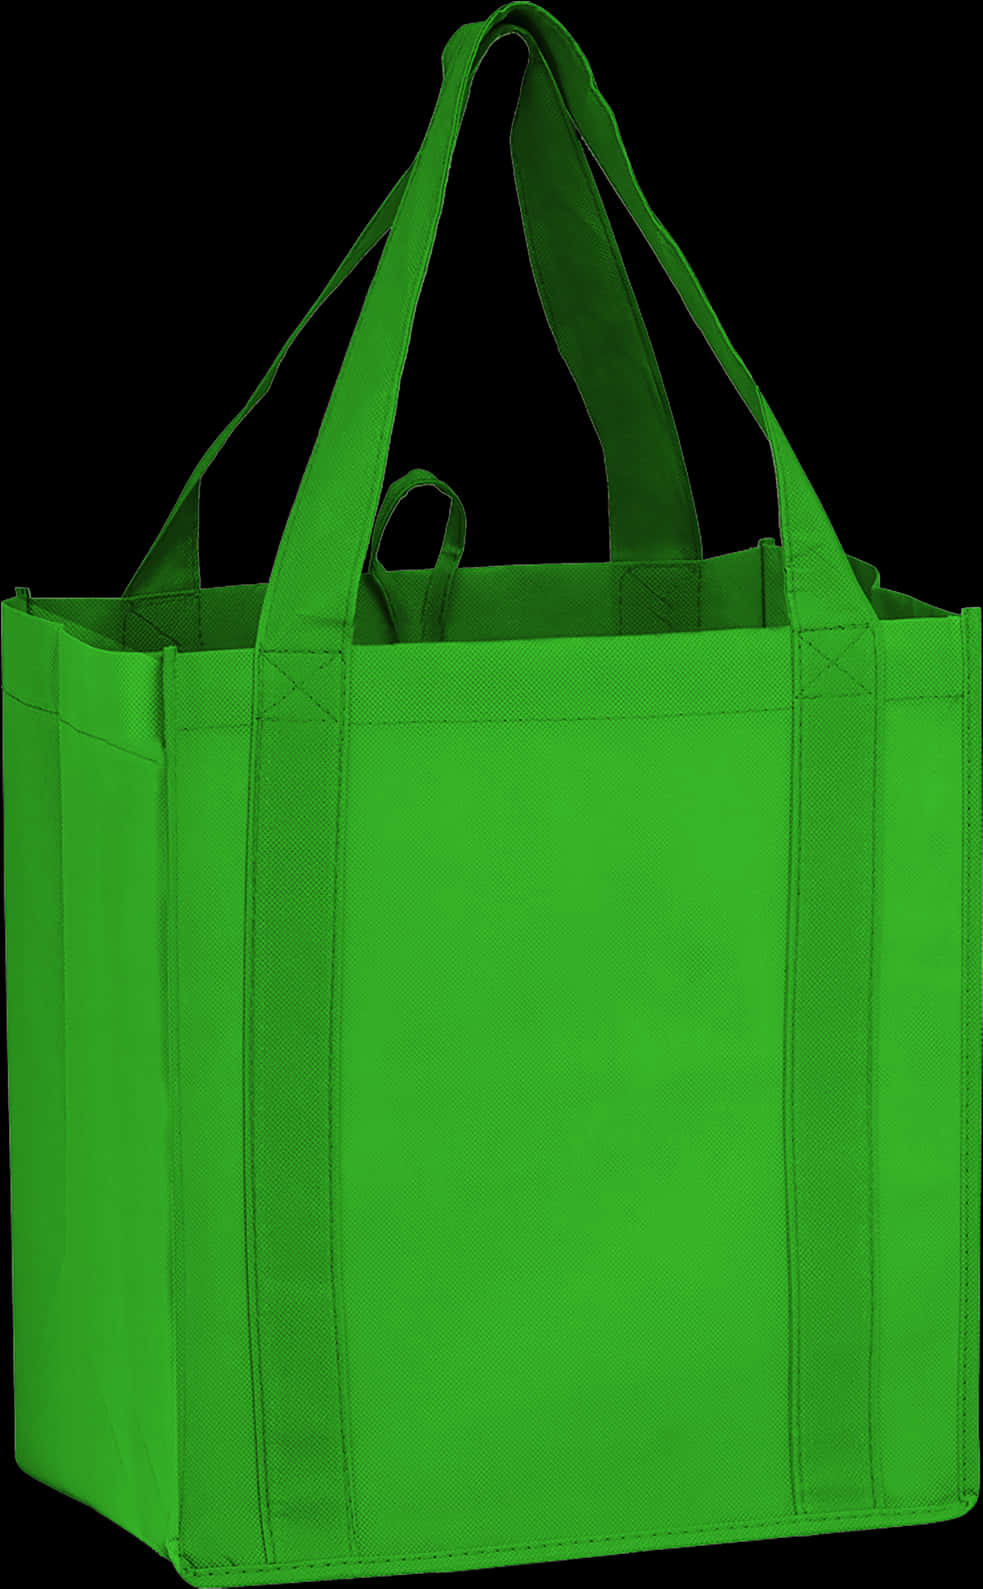 Green Tote Bag Isolated